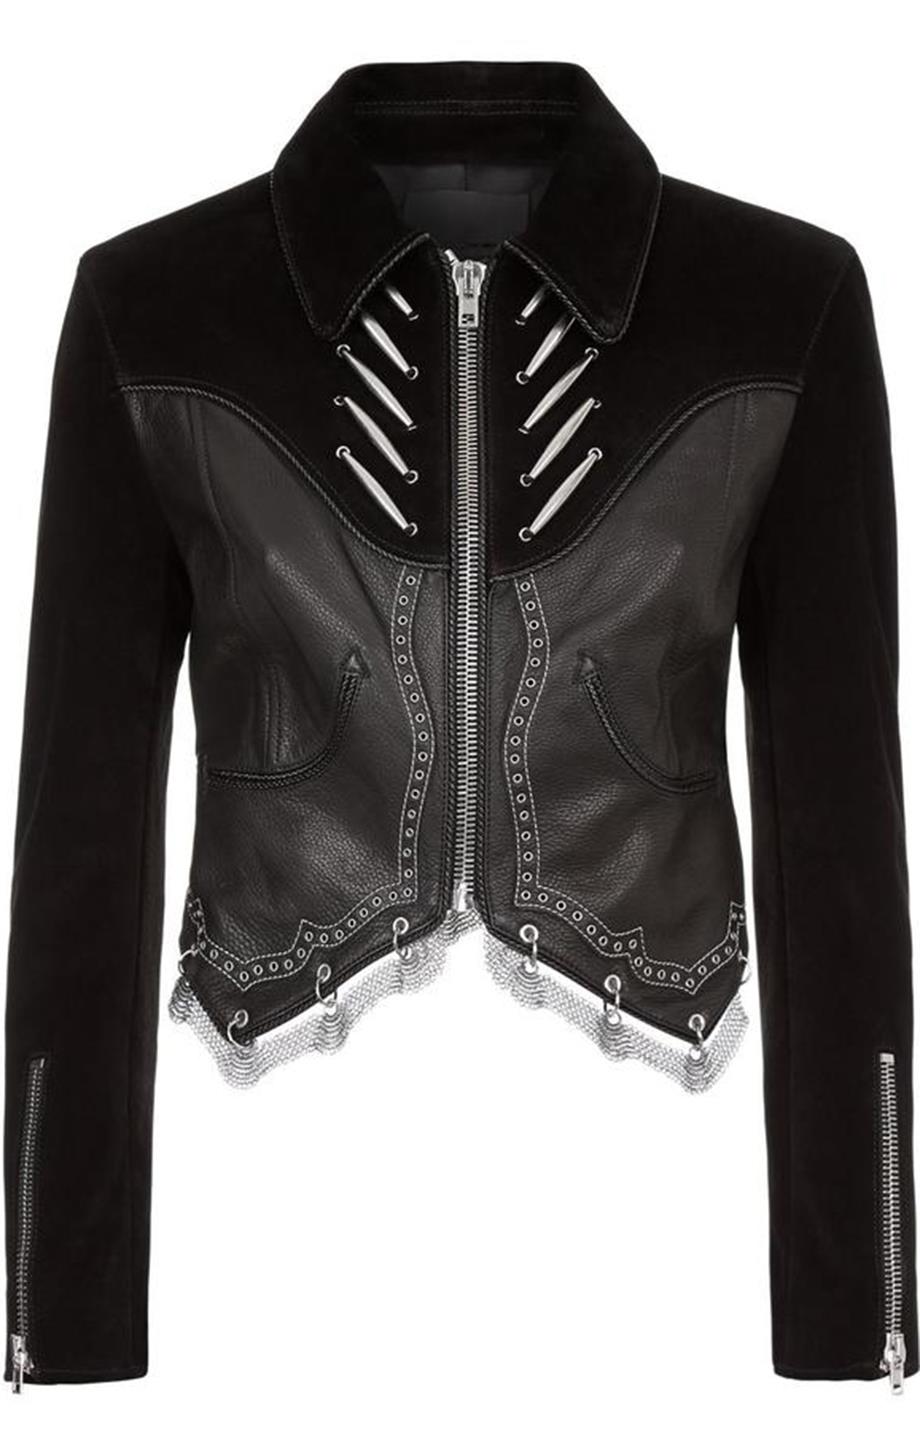 ALEXANDER WANG CROPPED SUEDE AND LEATHER JACKET SMALL